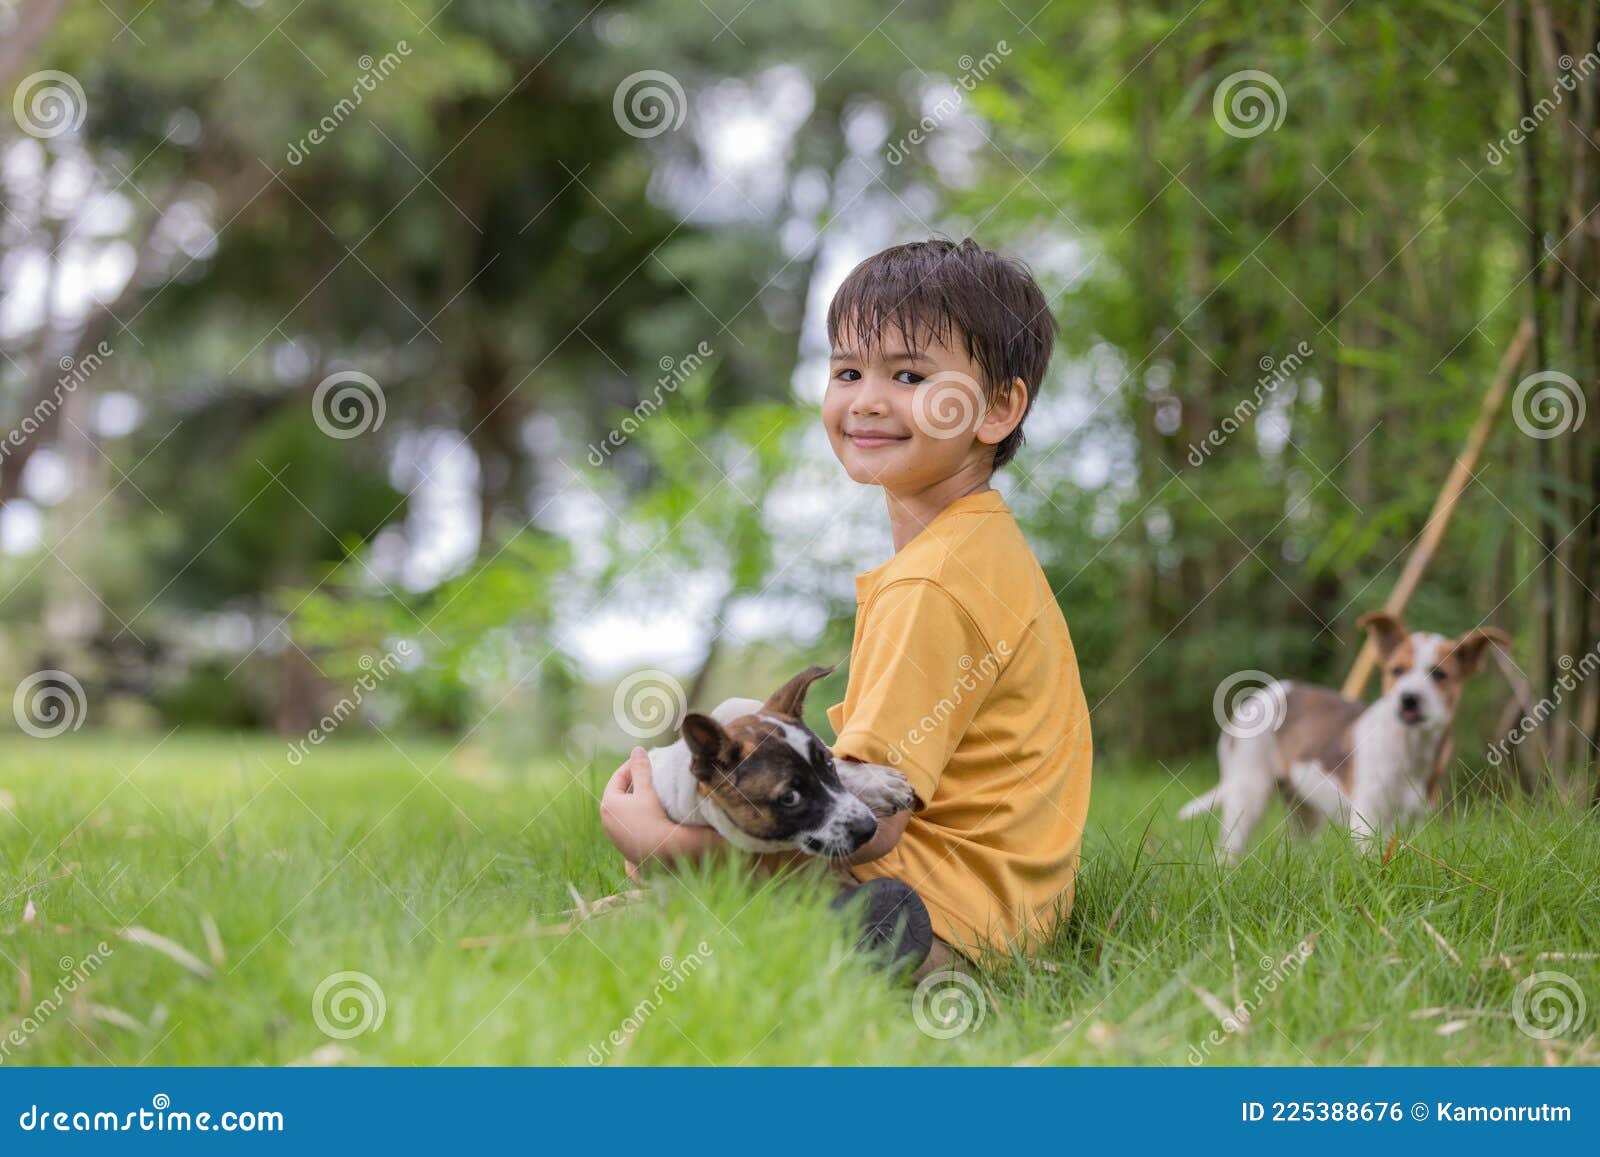 6. Happy little boy with blonde hair and his pet dog - wide 2